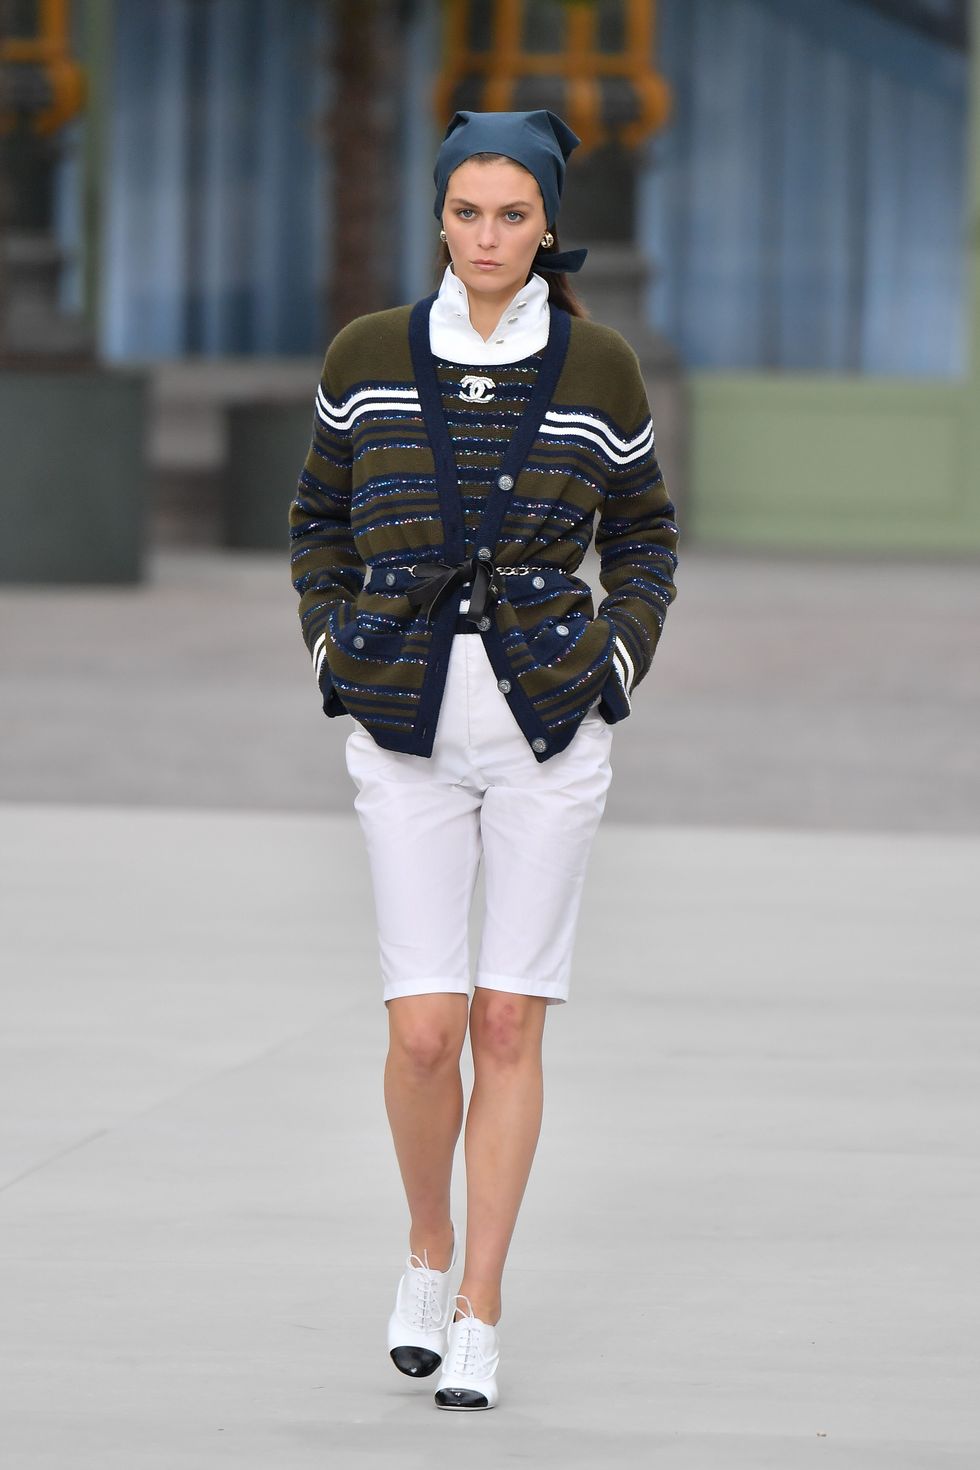 Chanel Opens a Cruise Pop-up at Nordstrom – WWD